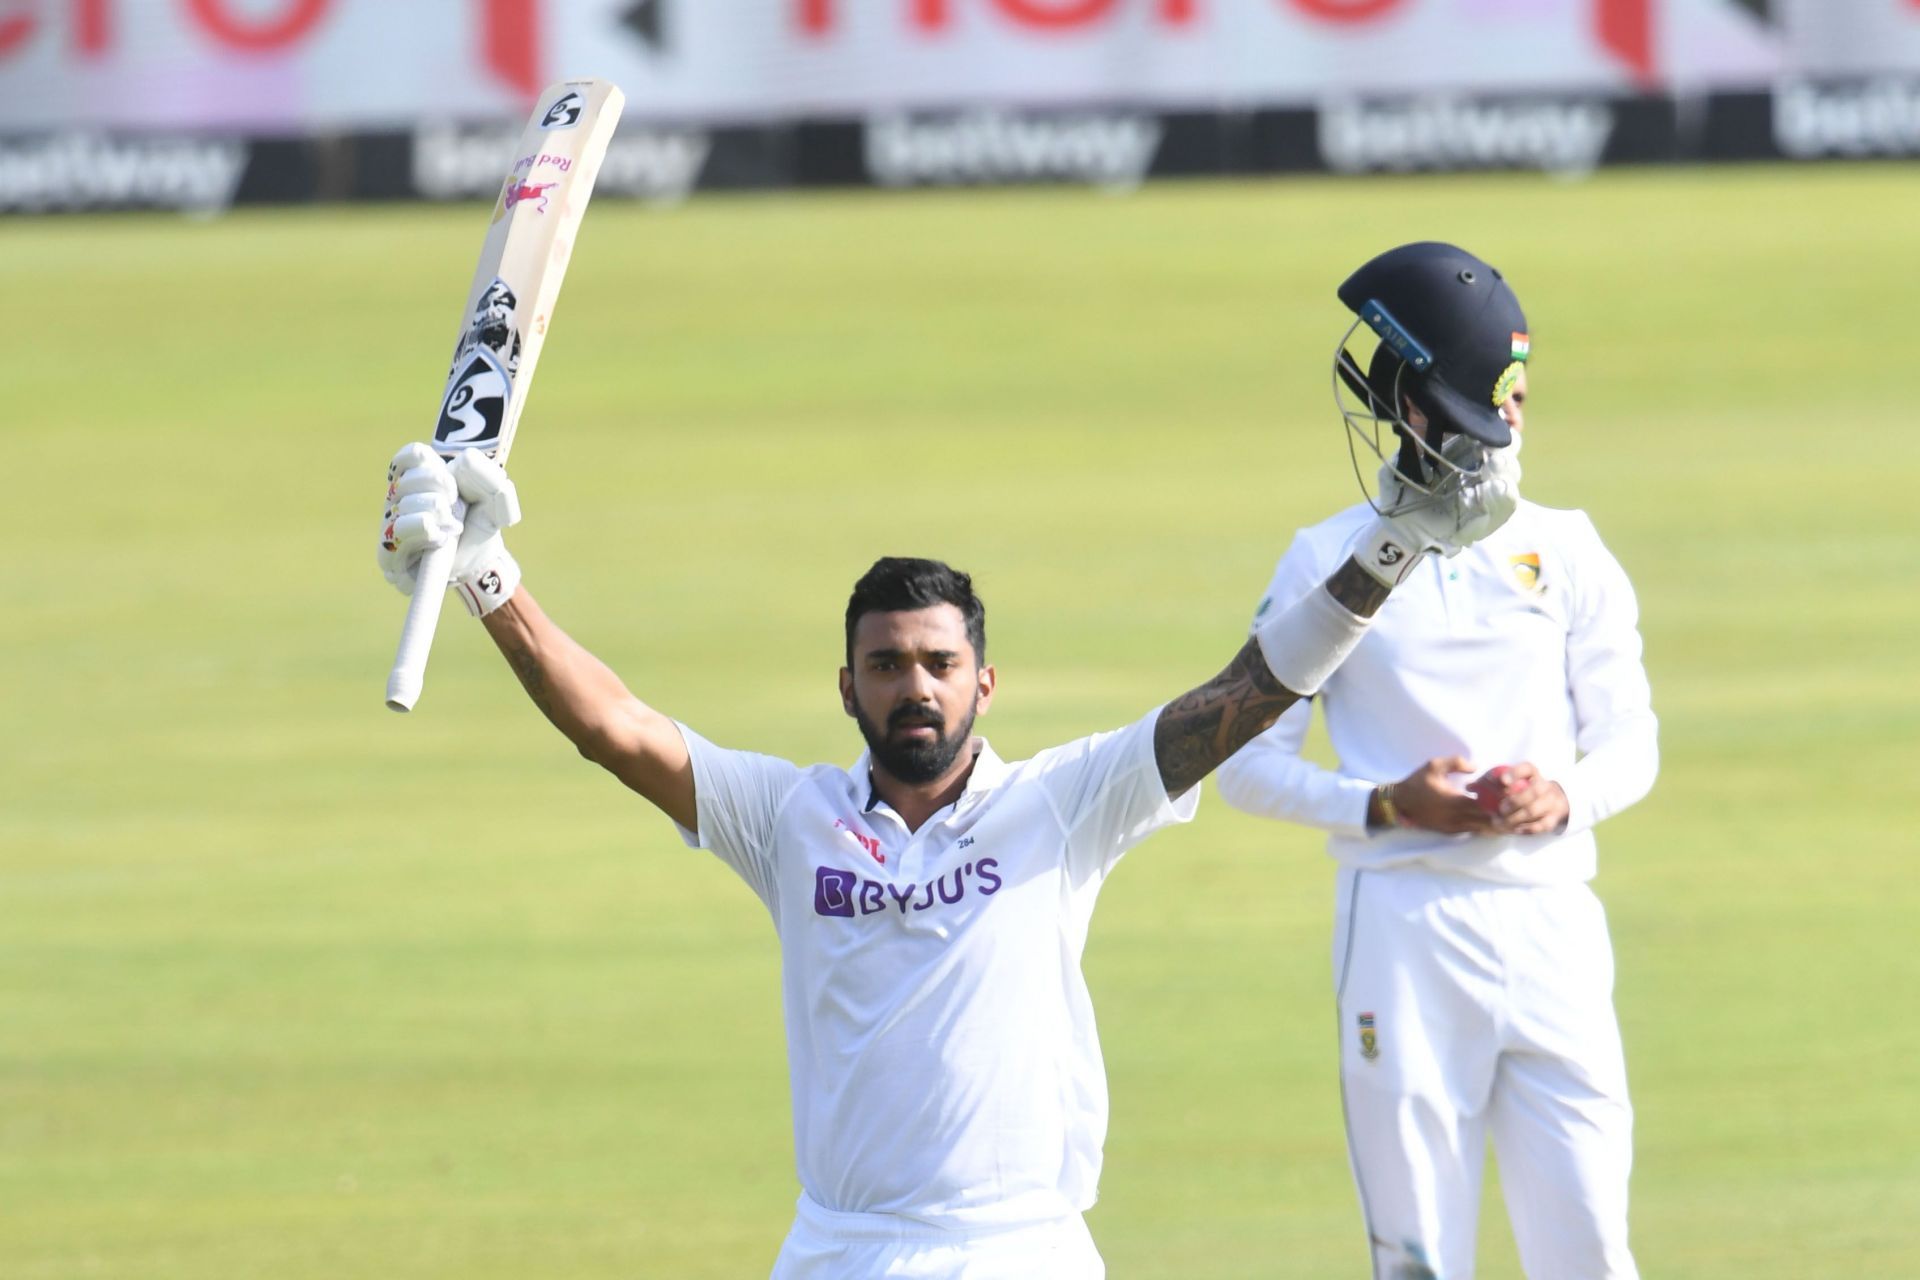 KL Rahul has been the standout performer for India in the Test